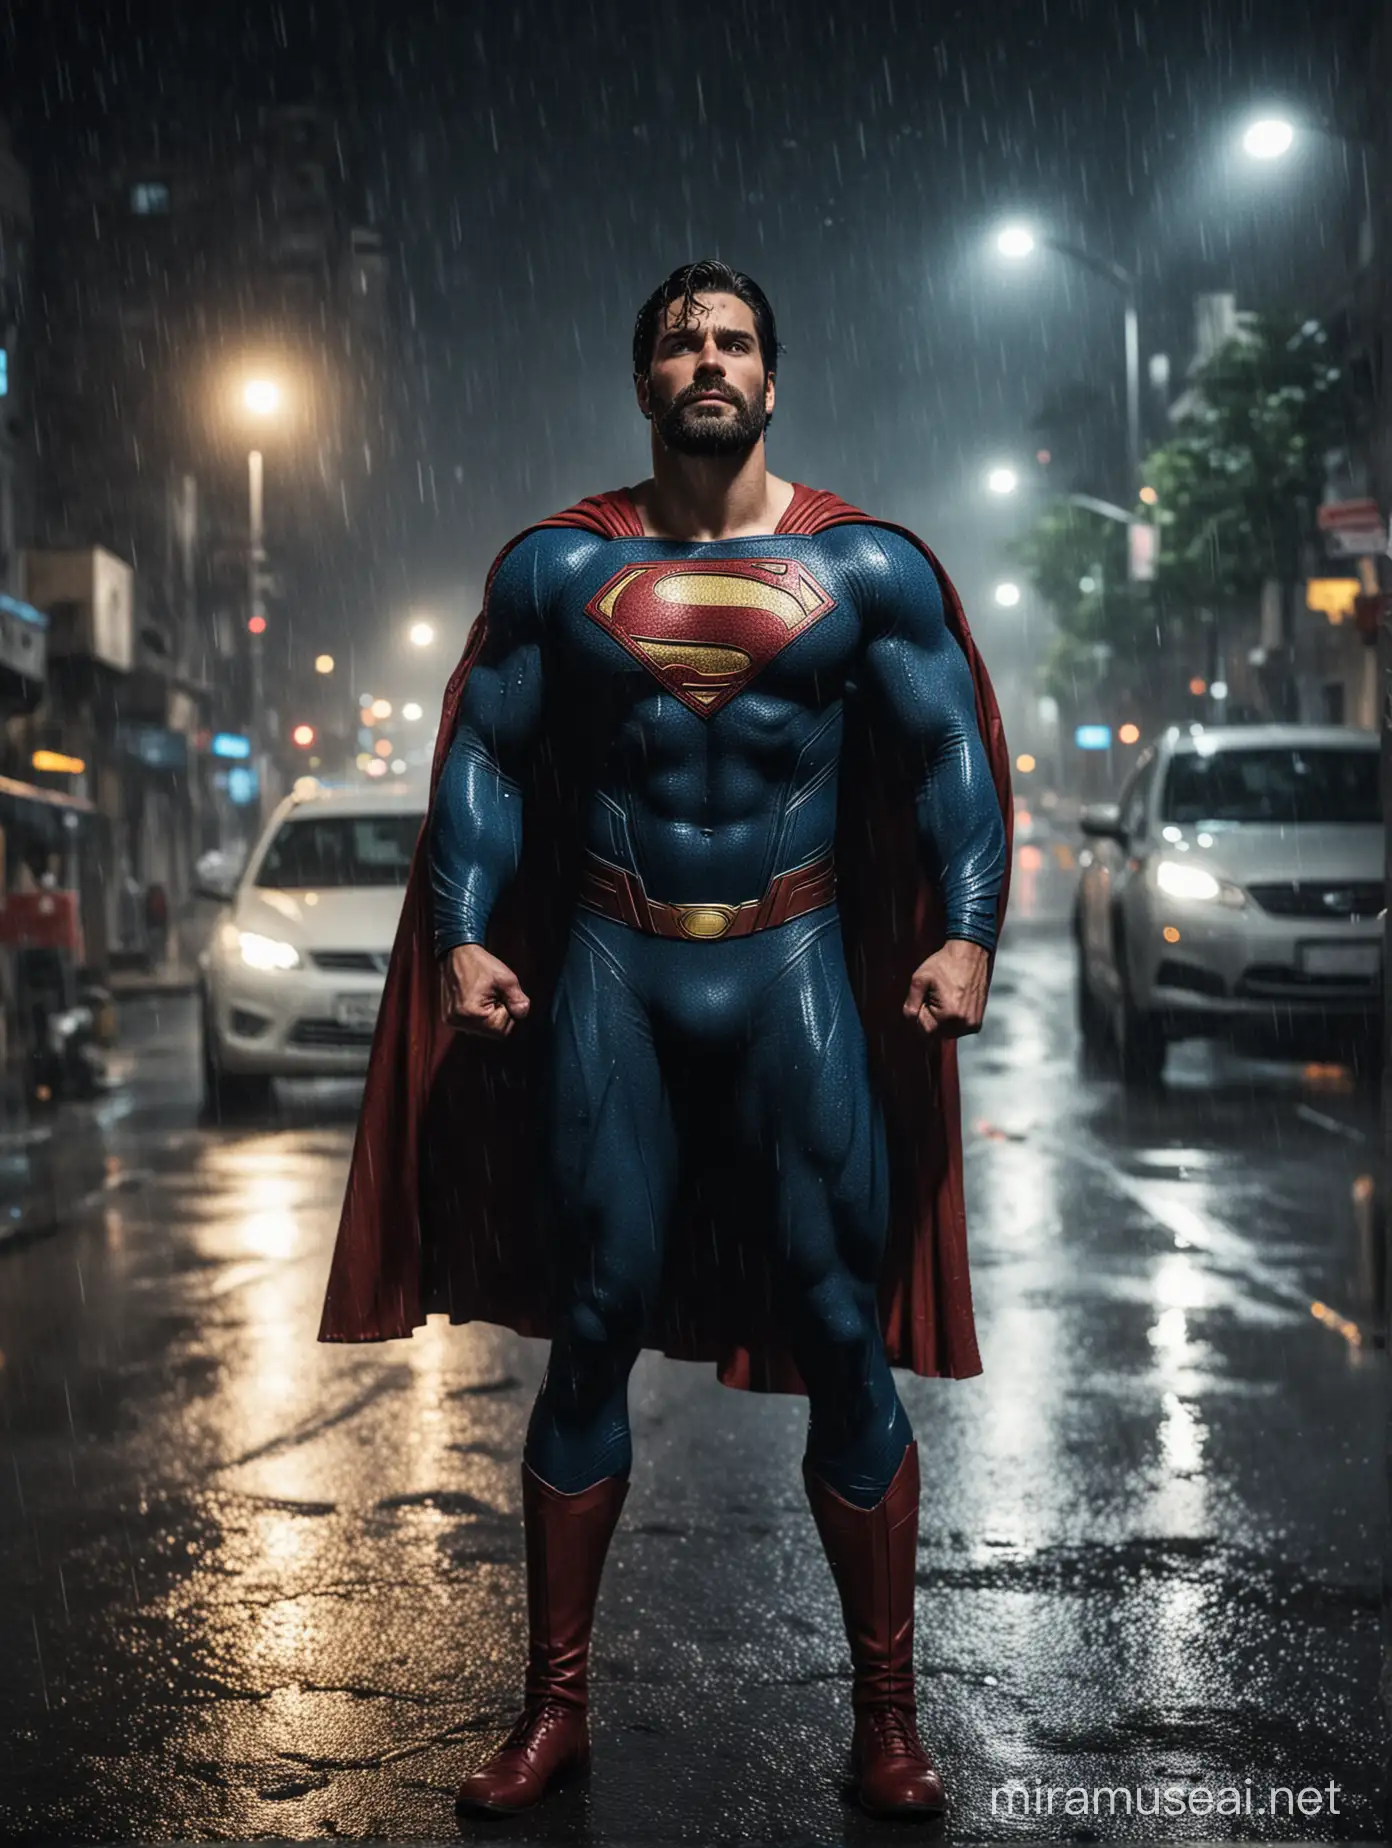 Muscular Superman Carrying Car in Rainy Night Street